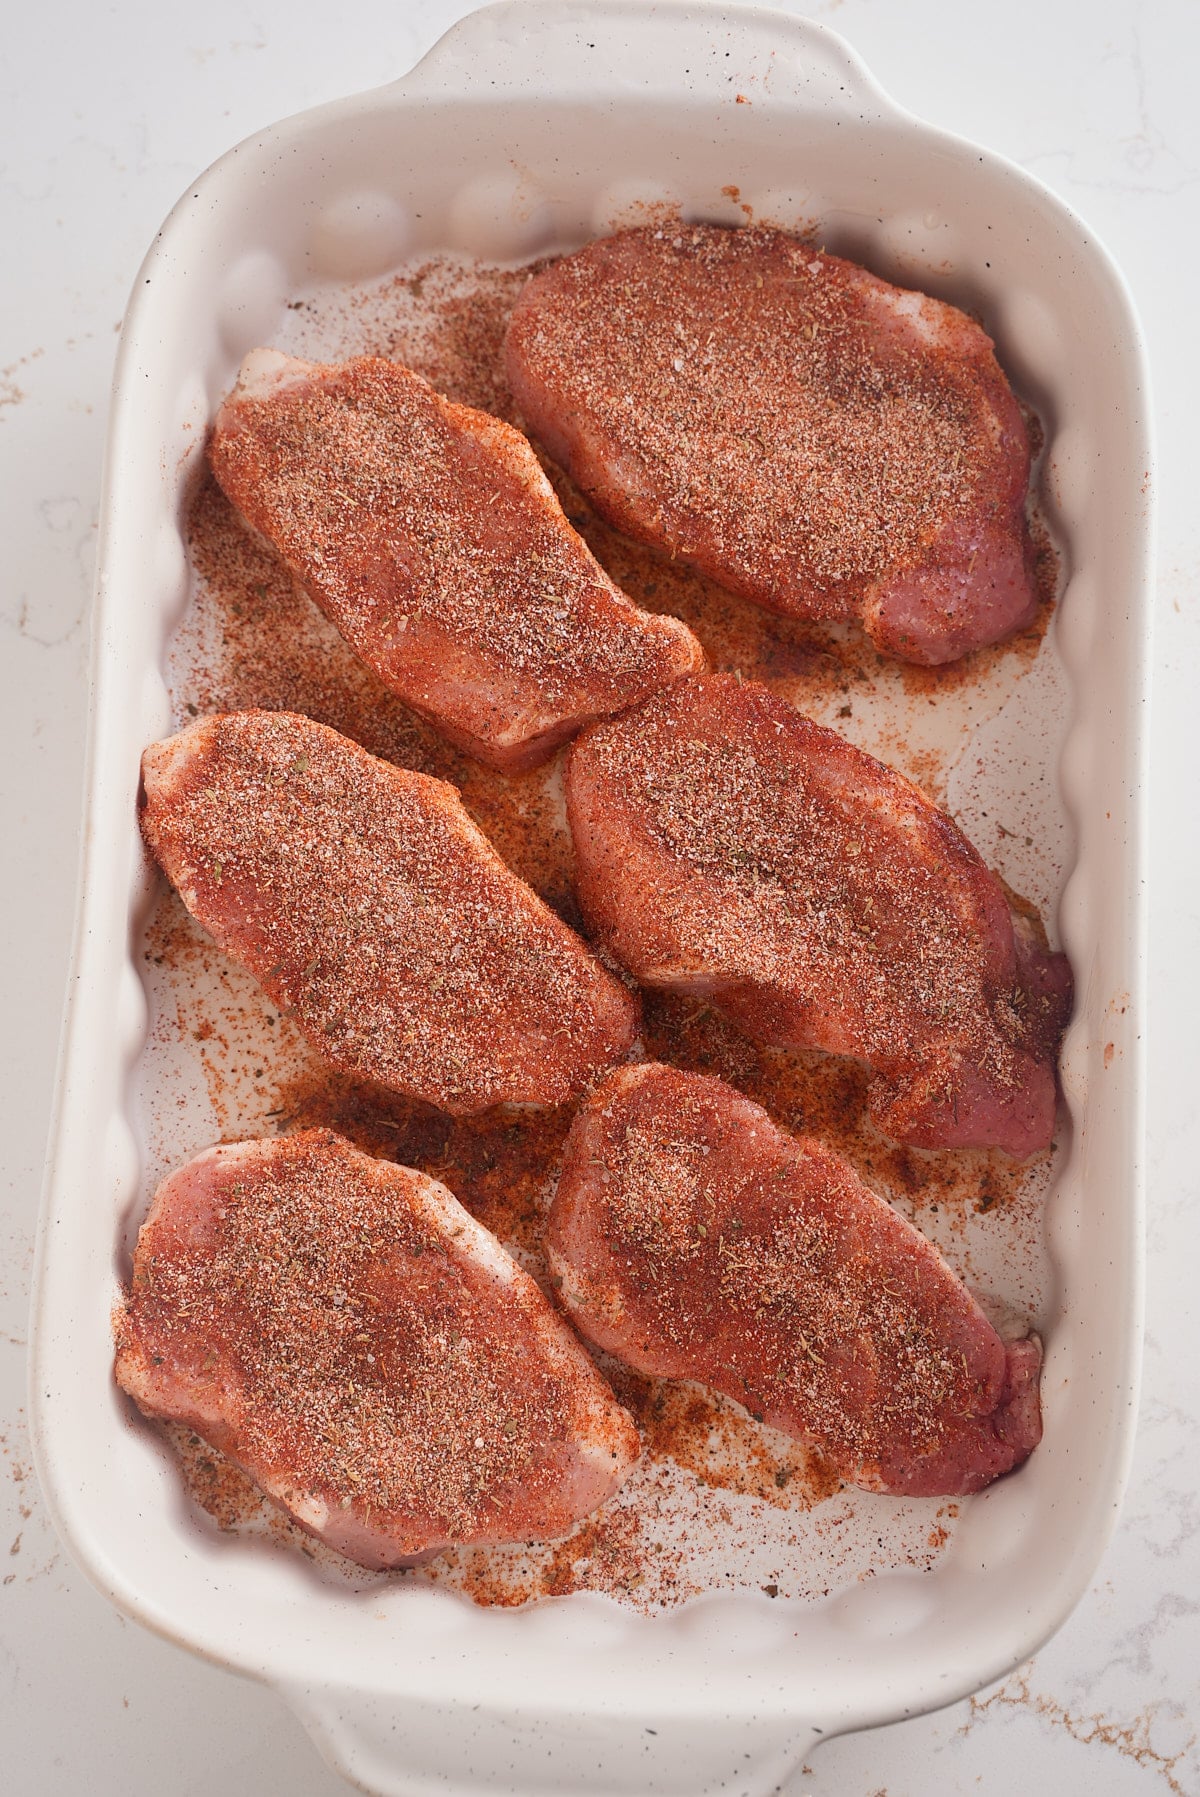 Seasoned pork chops placed in a white baking dish.